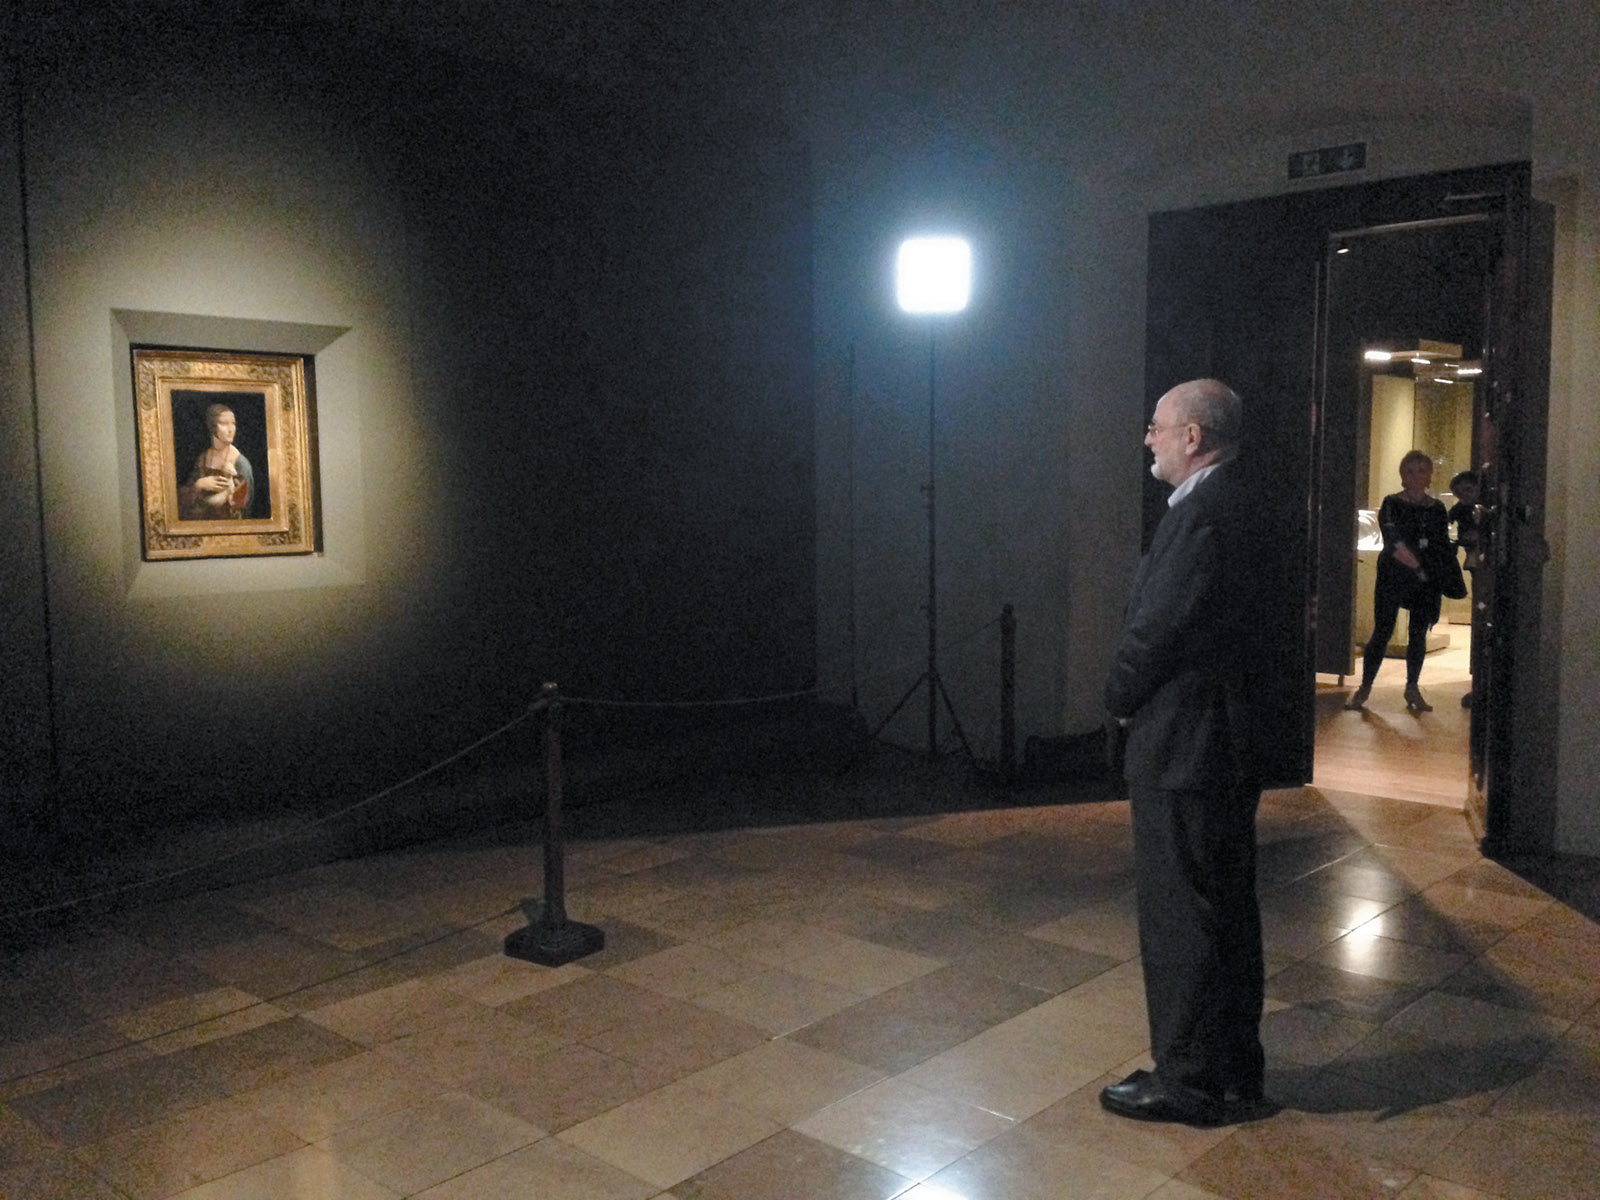 Niklas Frank—son of Hans Frank, Adolf Hitler’s personal lawyer—looking at Leonardo da Vinci’s Lady with an Ermine for the first time since he was a small child, Wawel Castle, Kraków, January 2014. According to Philippe Sands in East West Street, the elder Frank confiscated the painting from a Polish museum for ‘protective’ reasons while he was governor-general of Nazi-occupied Poland, and kept it in his private rooms at the castle.